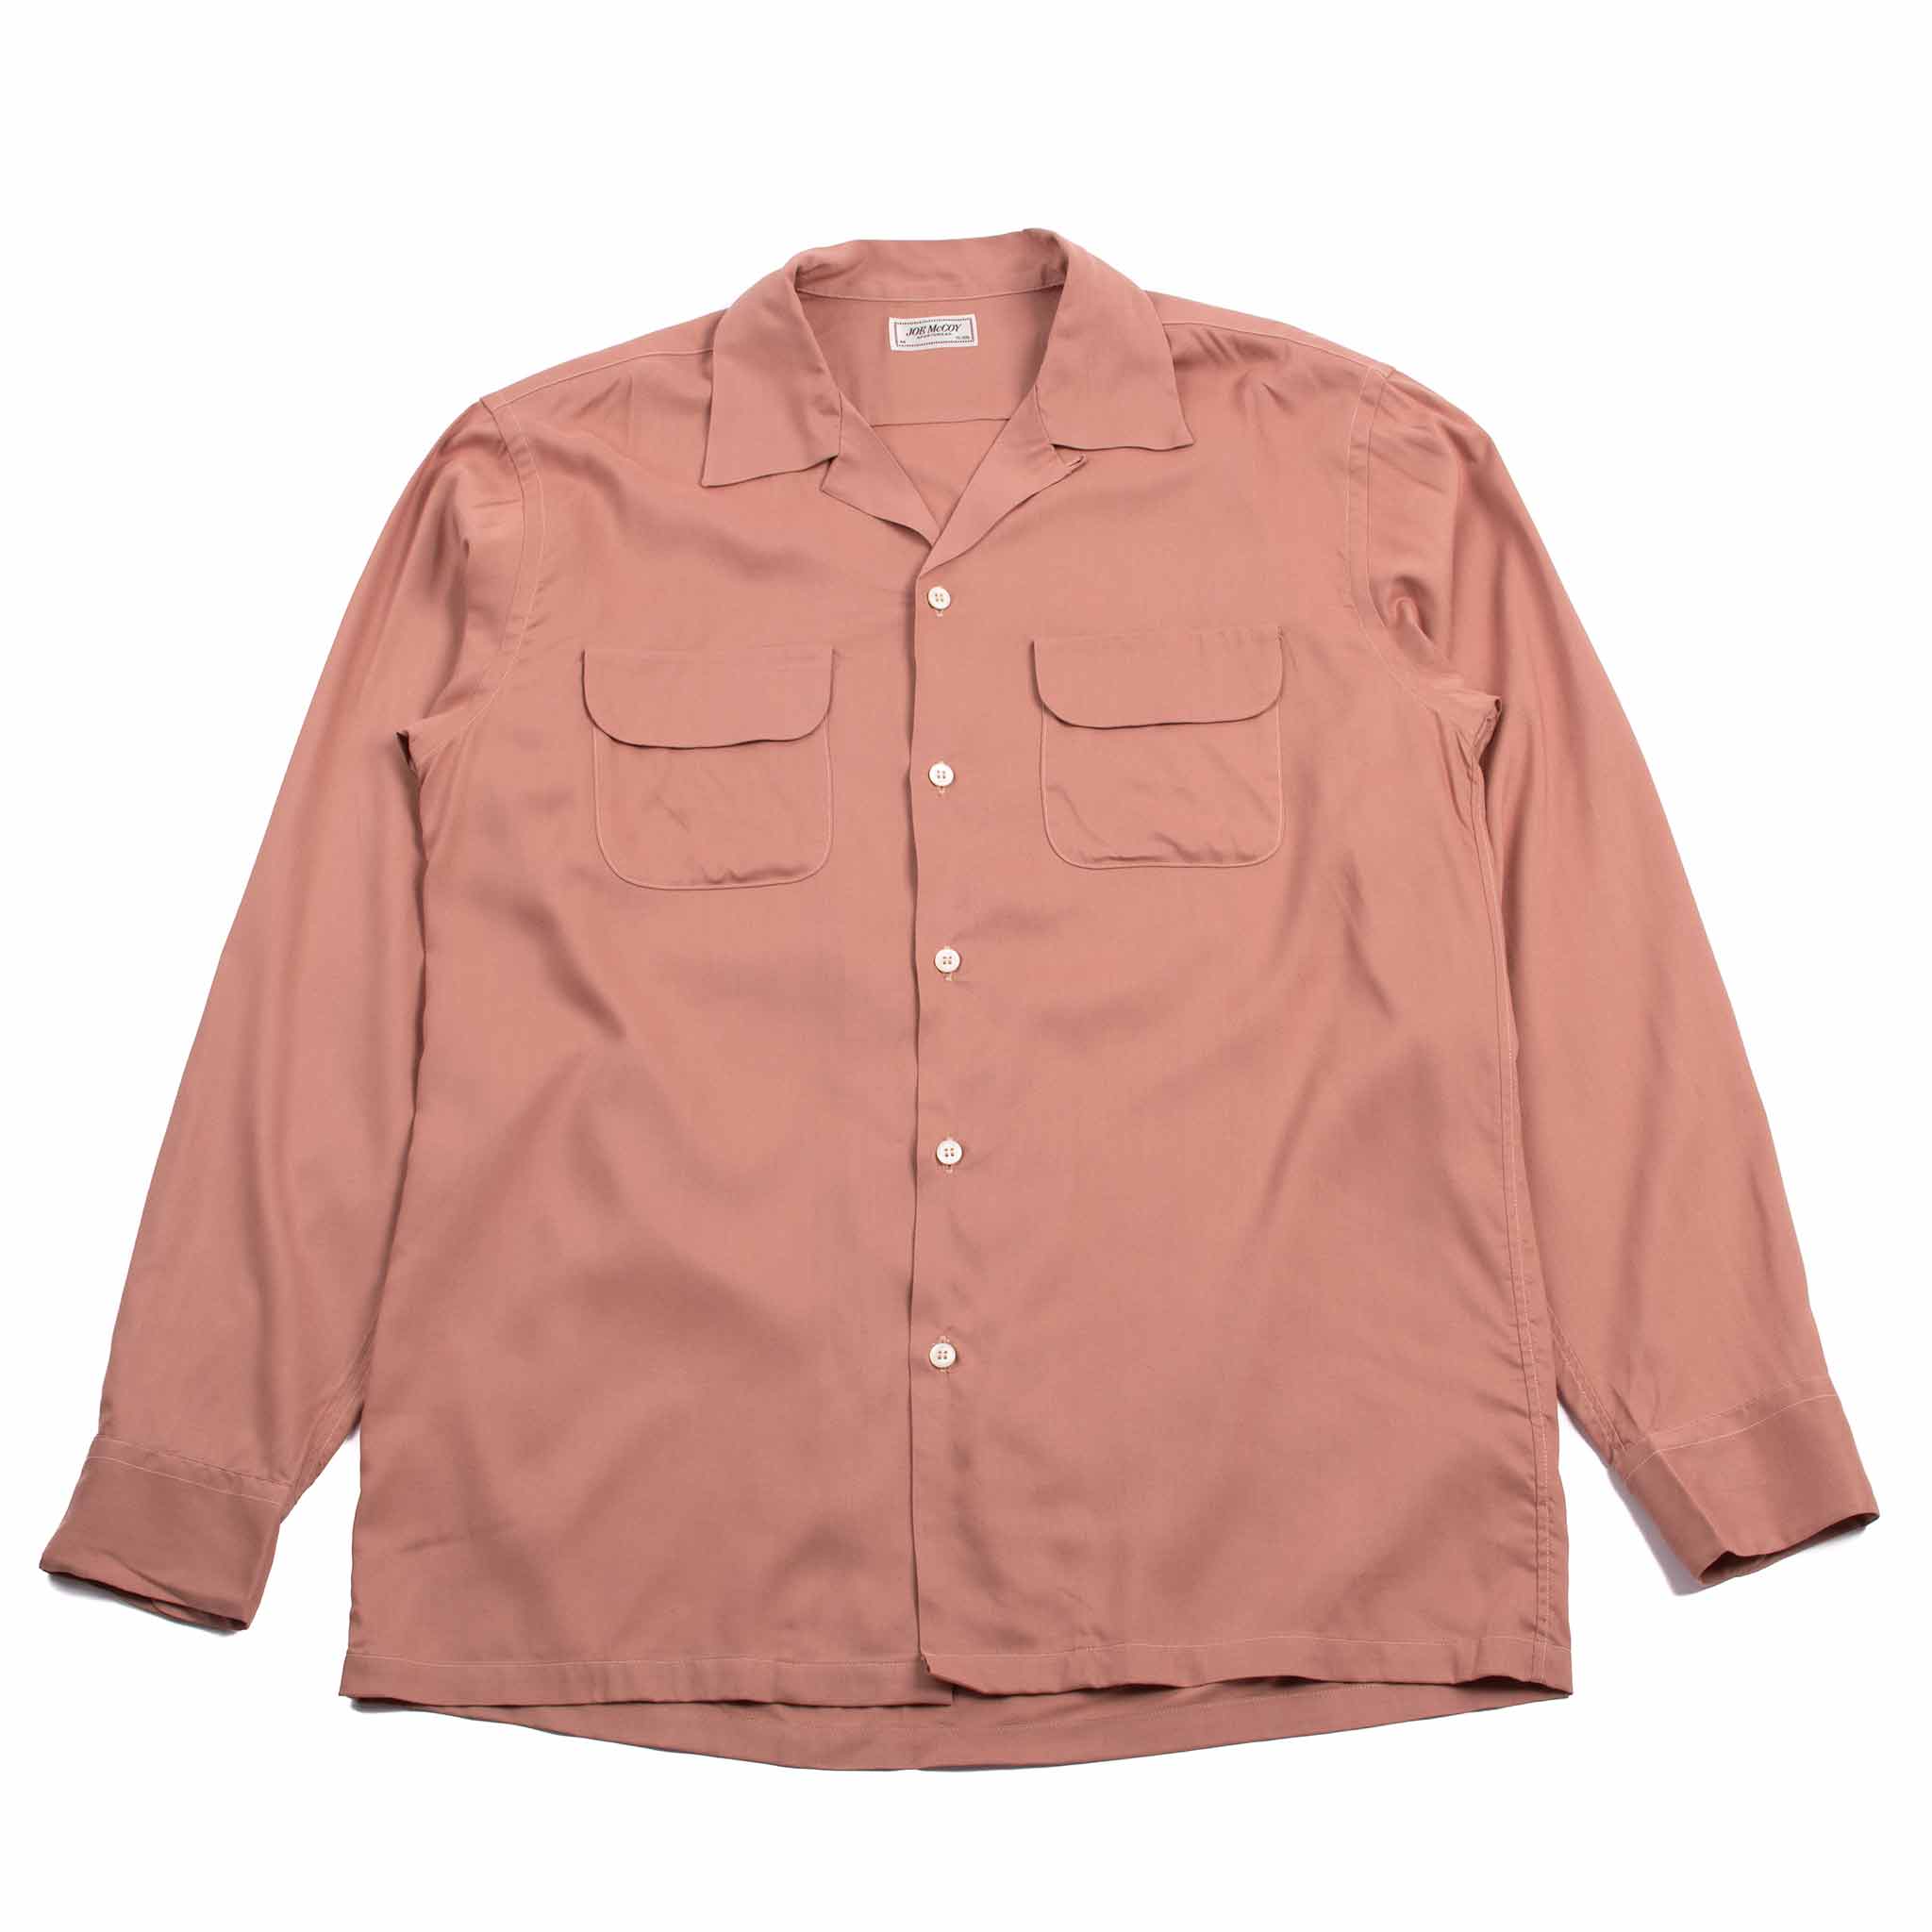 The Real McCoy's MS21009 Open Collar Rayon Shirt Pink